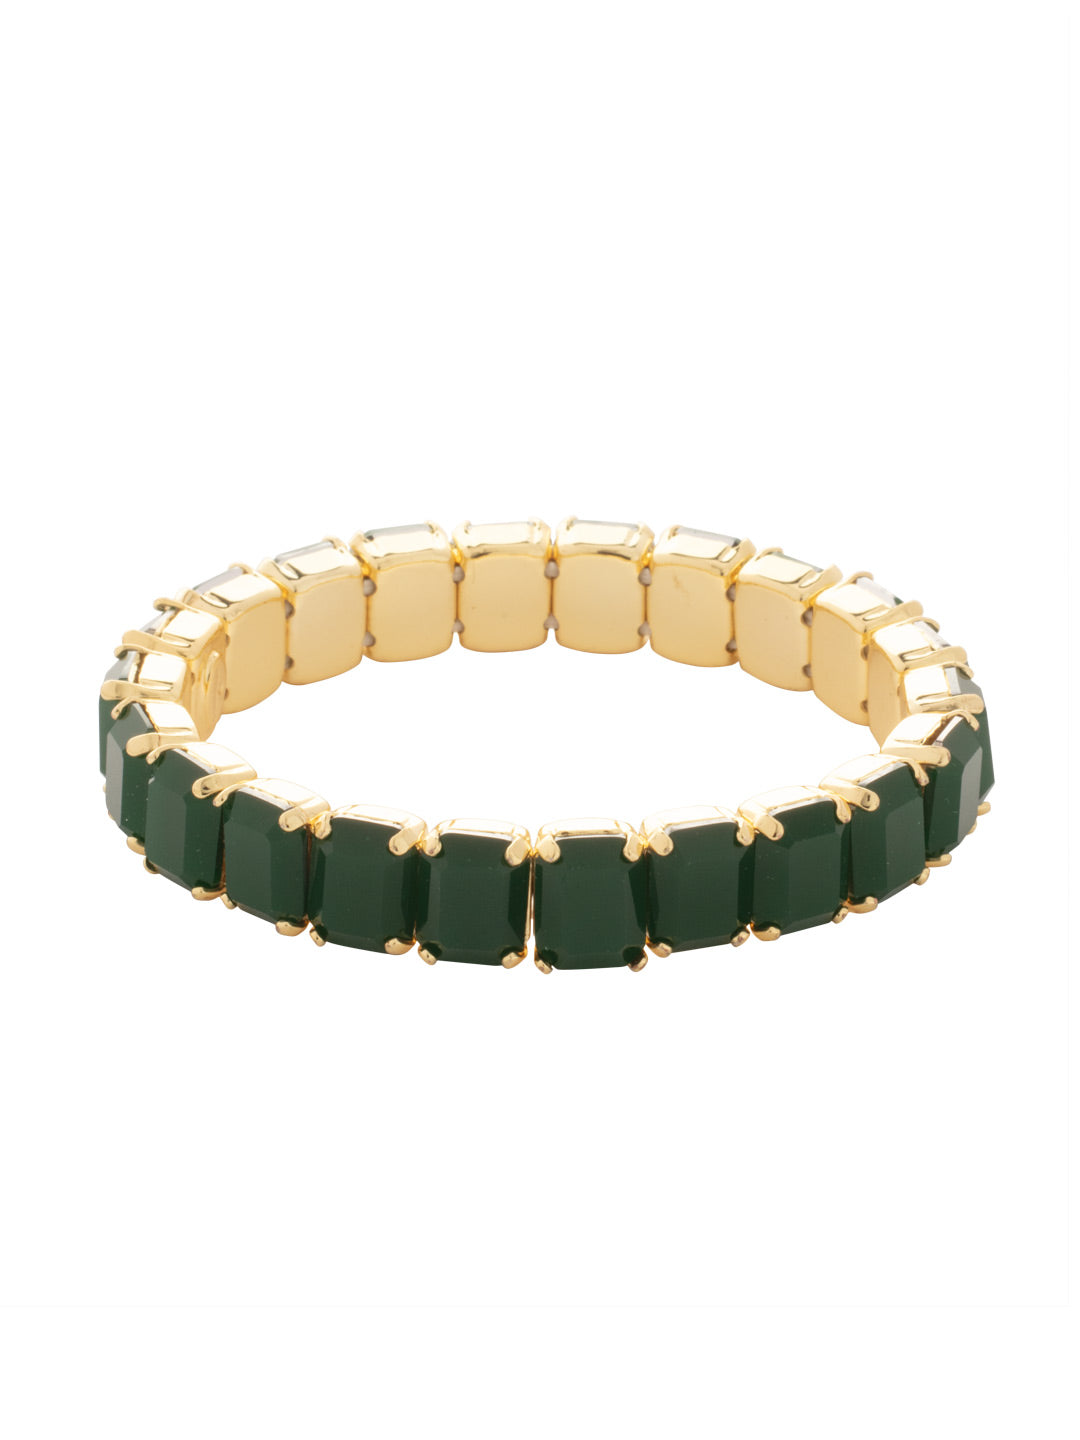 7 inch Octavia Stretch Bracelet - BFM30BGPGO - <p>The 7 inch Octavia Stretch Bracelet features a line of emerald cut crystals on a sturdy jewelers' filament, stretching to fit most wrists comfortably, without the hassle of a clasp! (7 inches, fits average wrist sizes) From Sorrelli's Palace Green Opal collection in our Bright Gold-tone finish.</p>